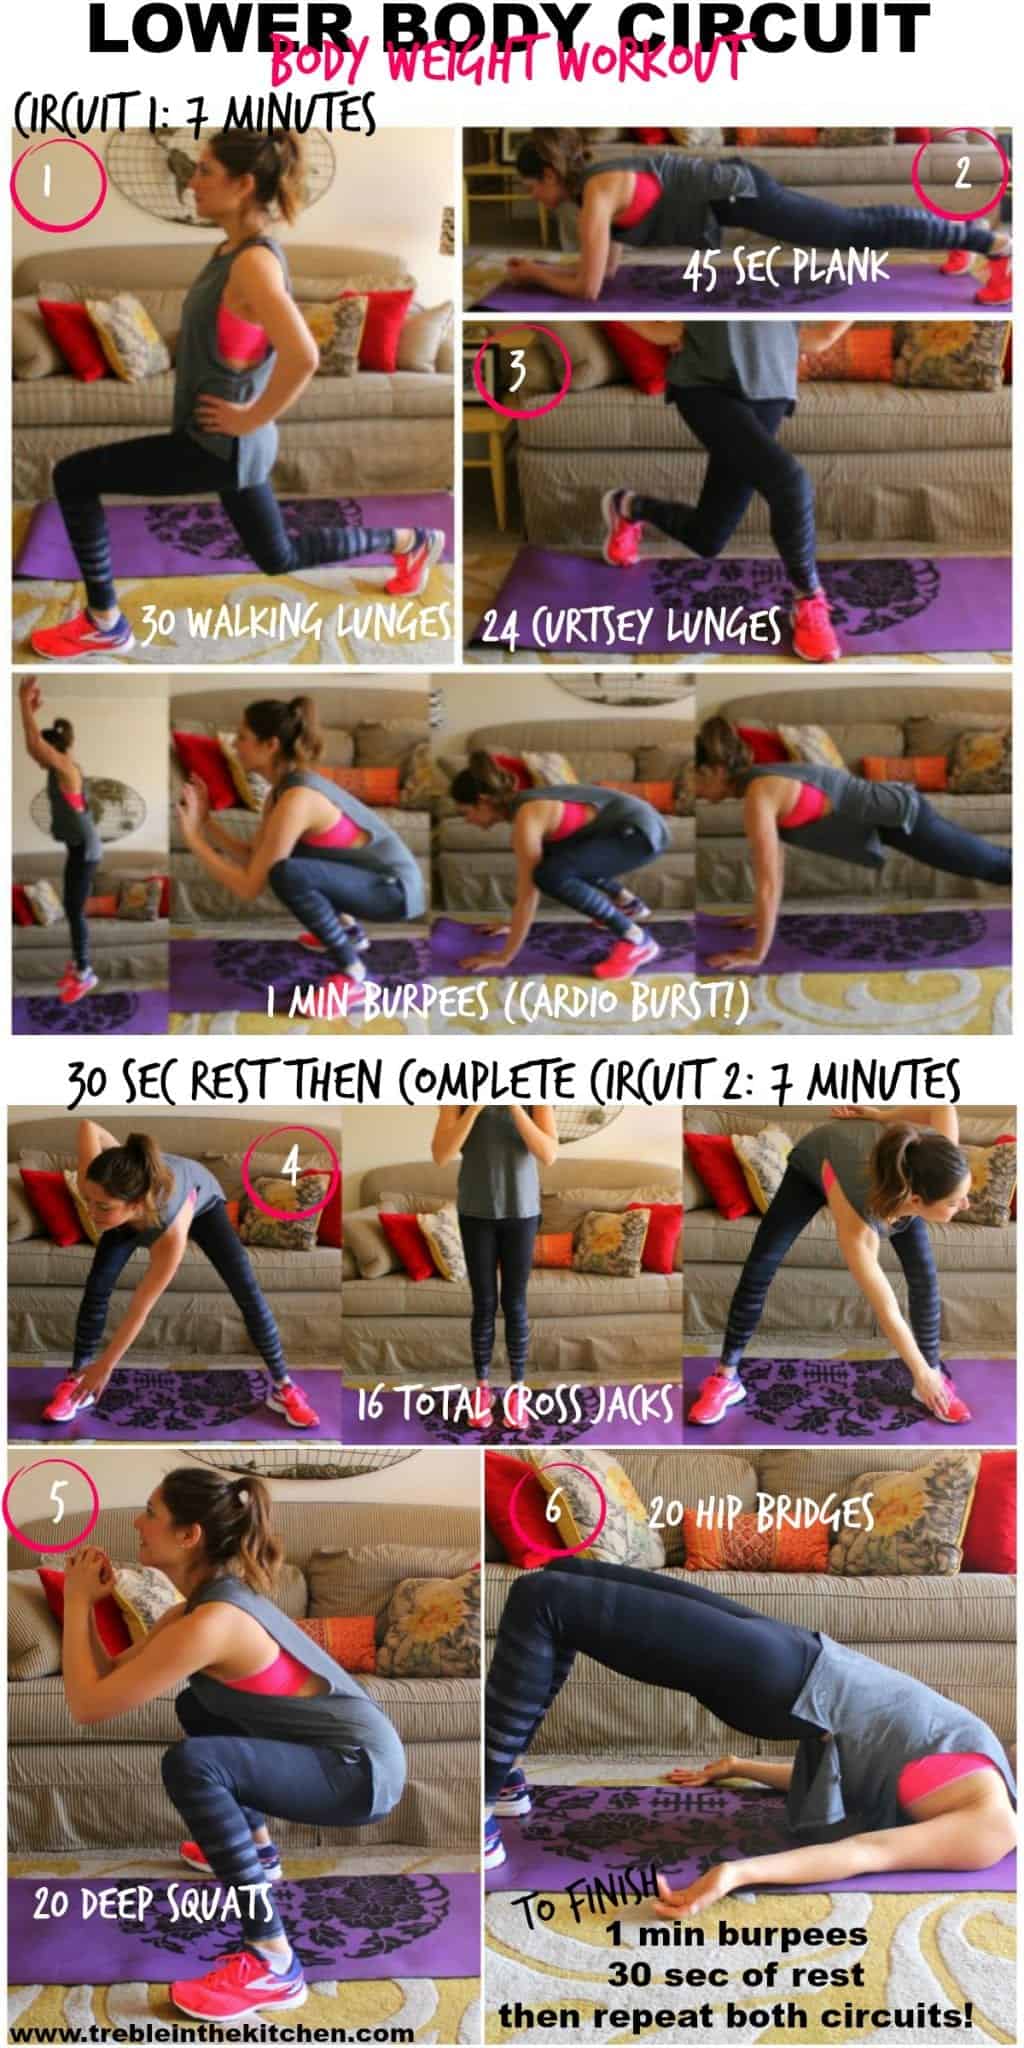 Lower Body Circuit Workout (Bodyweight Only) from Treble in the Kitchen